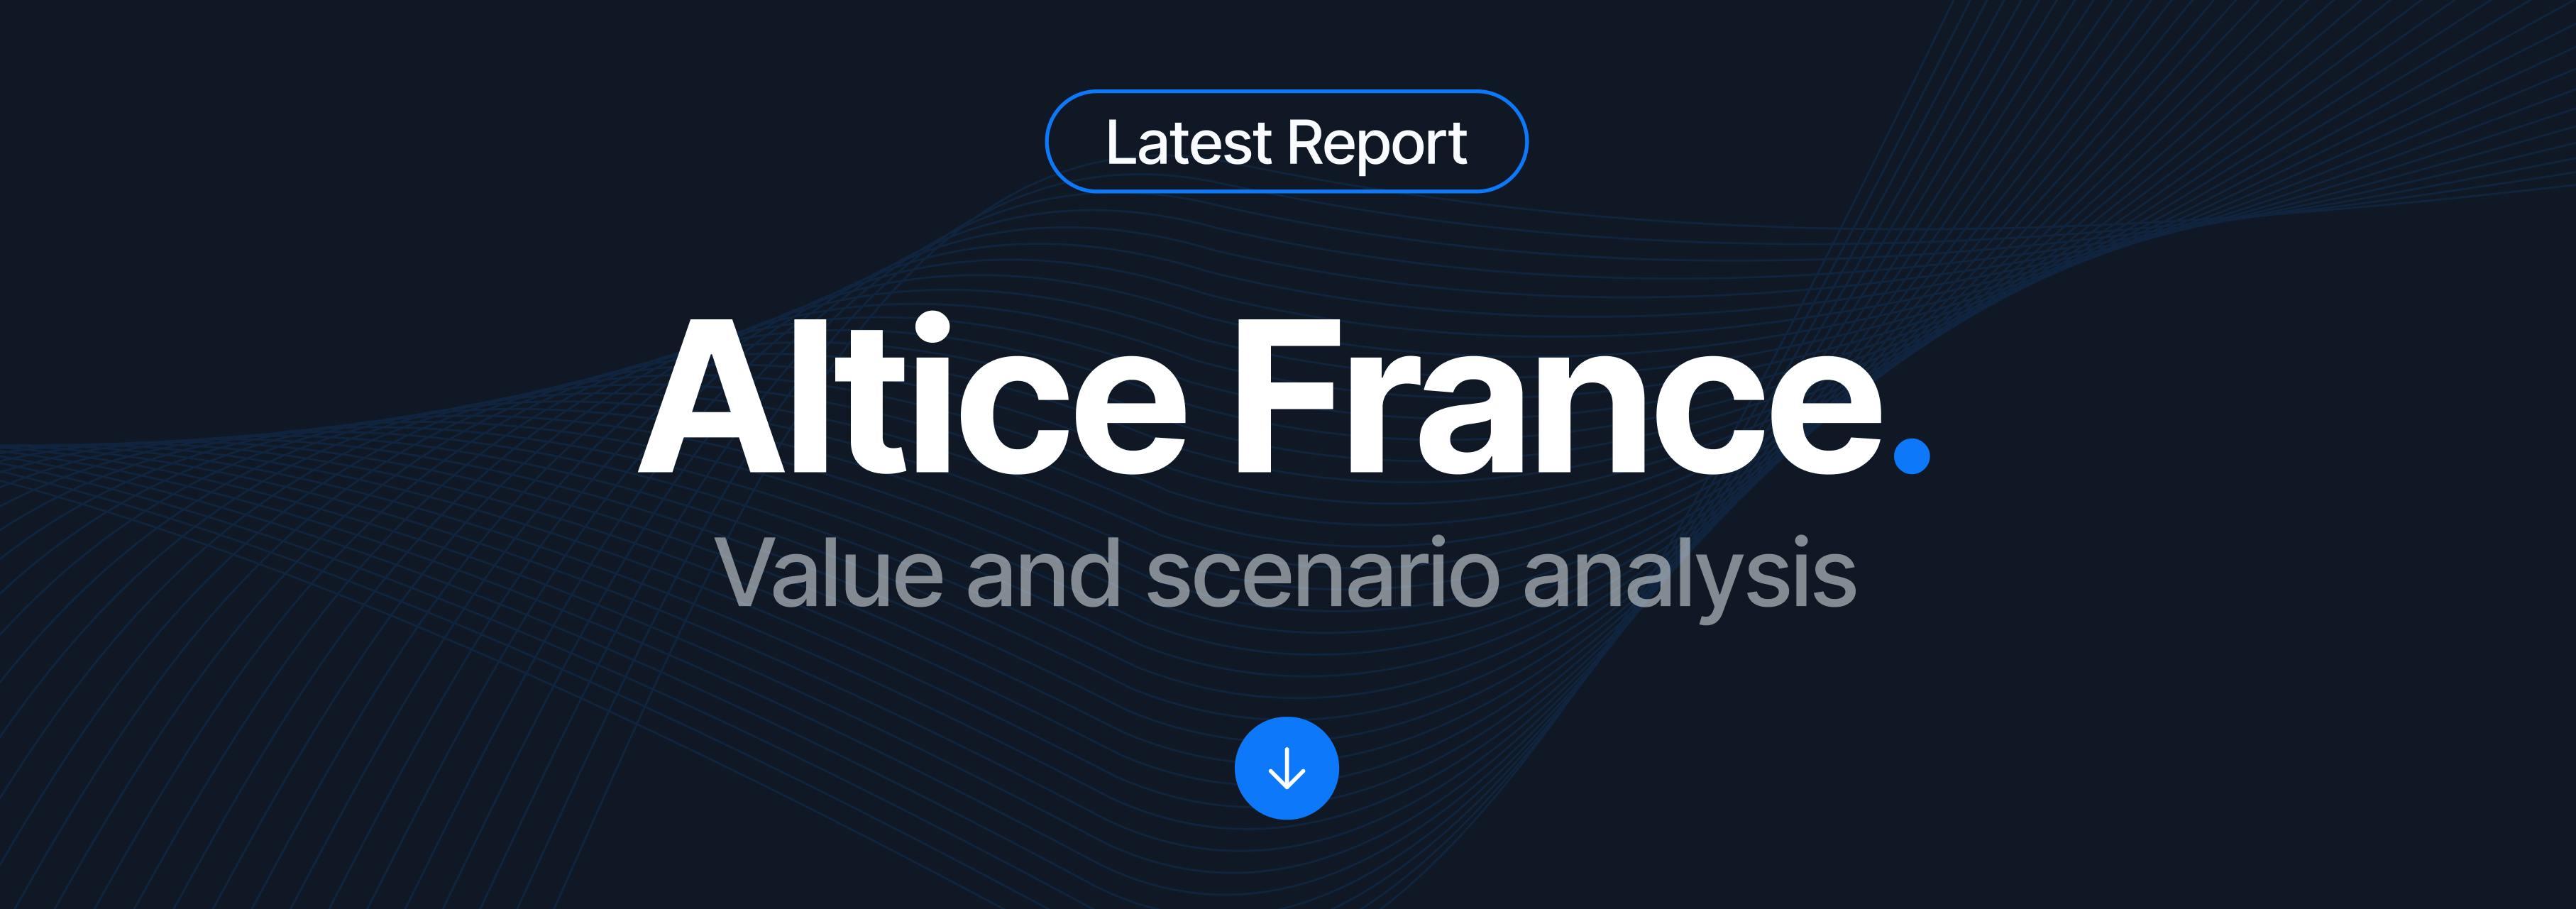 Altice France value and scenario analysis